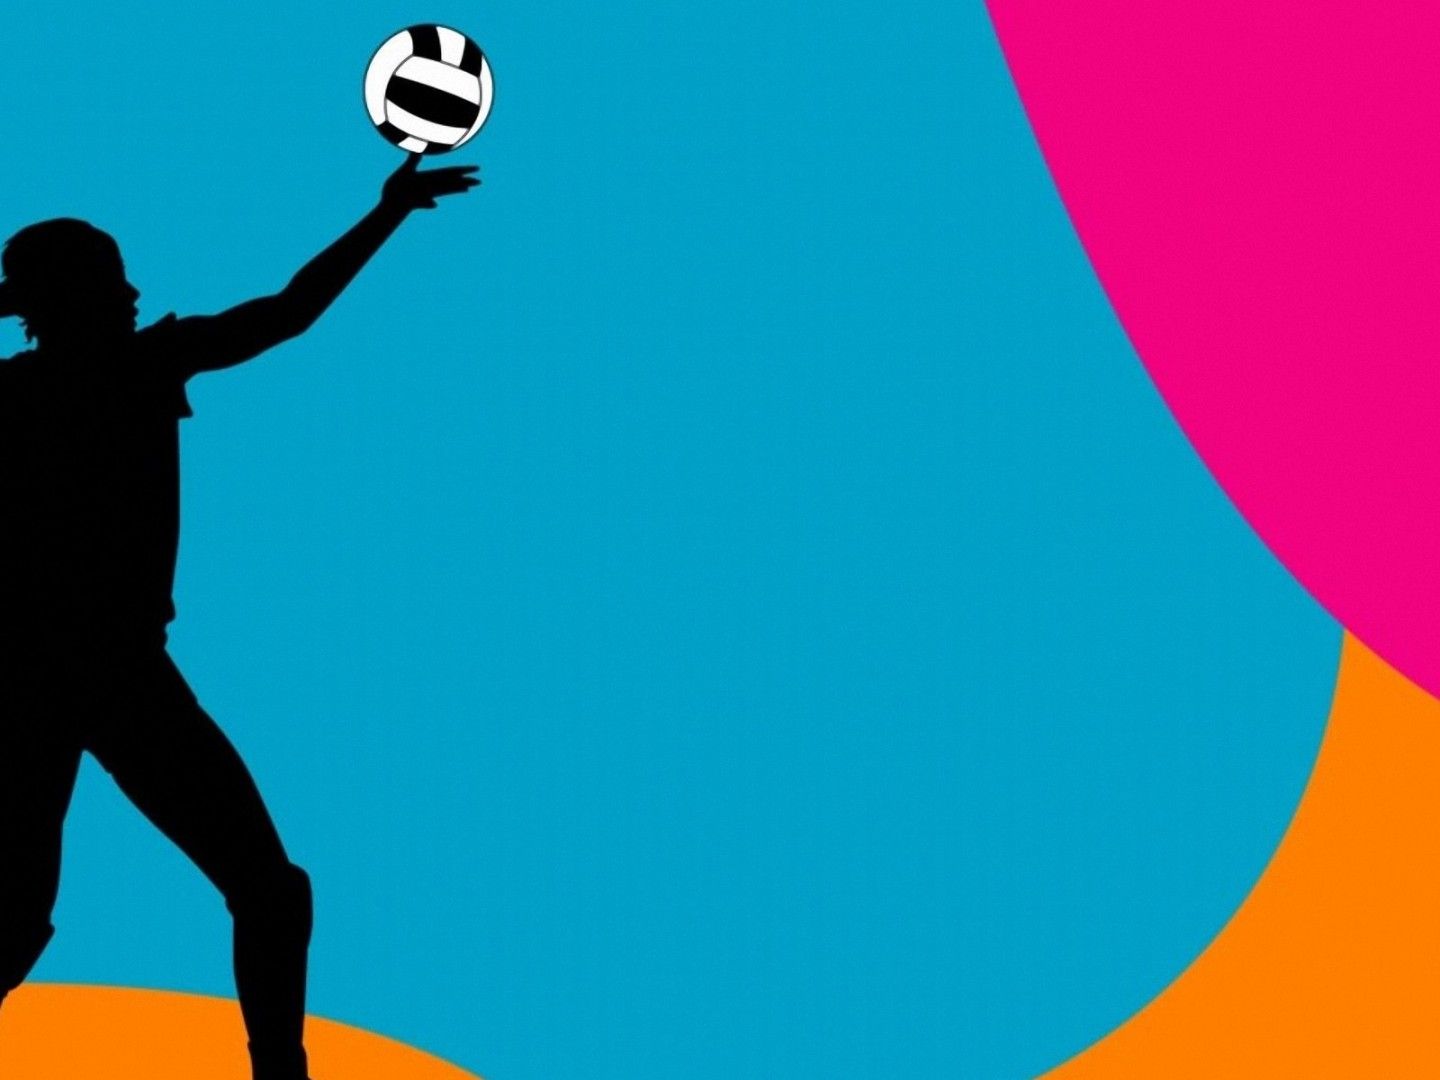 A silhouette of a woman serving a volleyball on a blue, pink and orange background - Volleyball